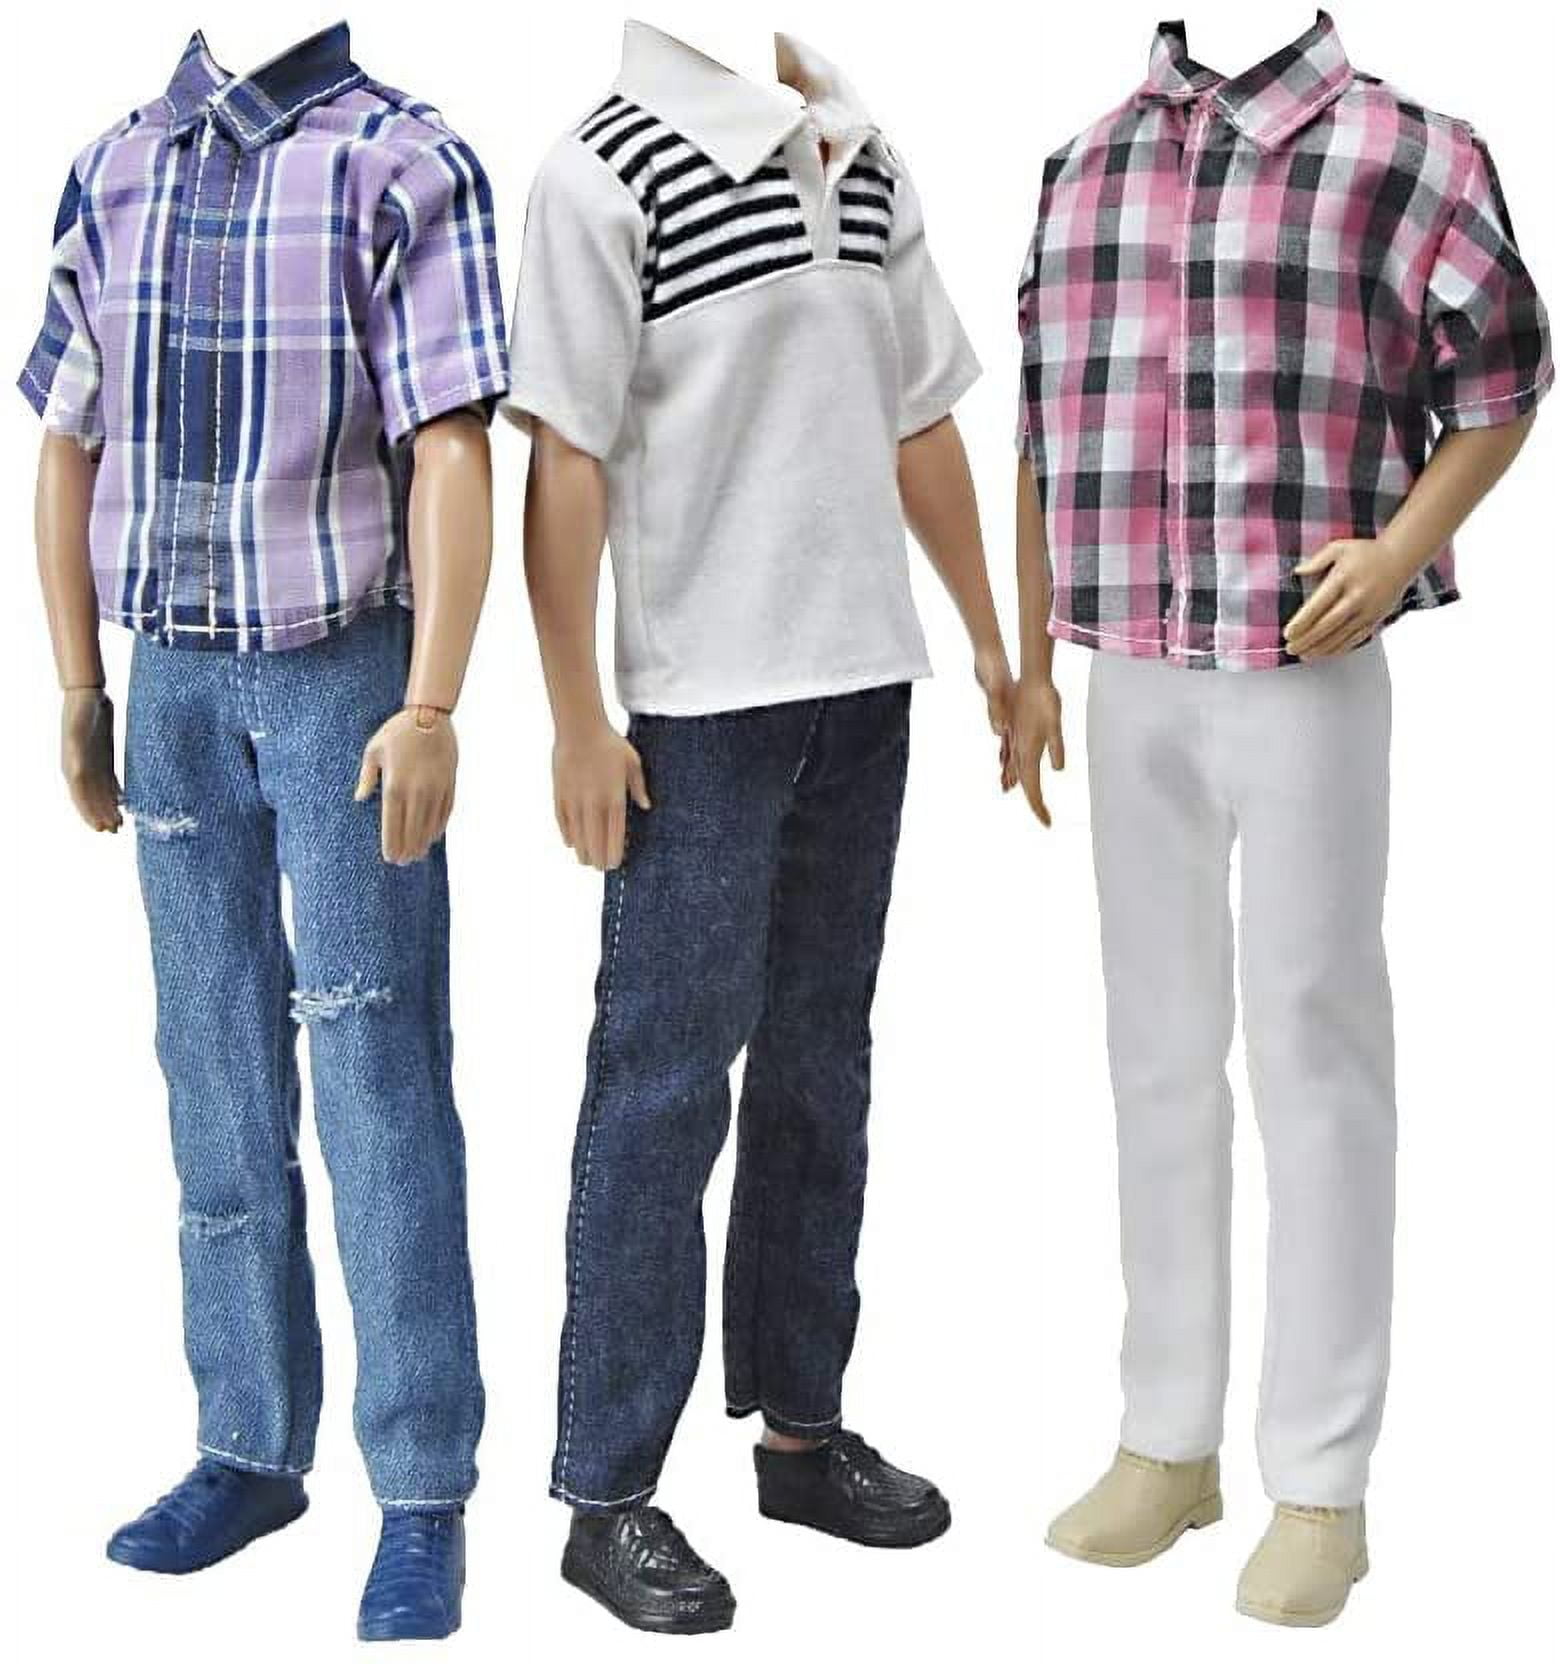 Ken Doll Clothes and Accessories for 12 Inch Boy Doll Include 6 Sets  Fashion Doll Clothes 13 Pieces Ken Doll Pajamas Outfits for 12'' Boy Doll …